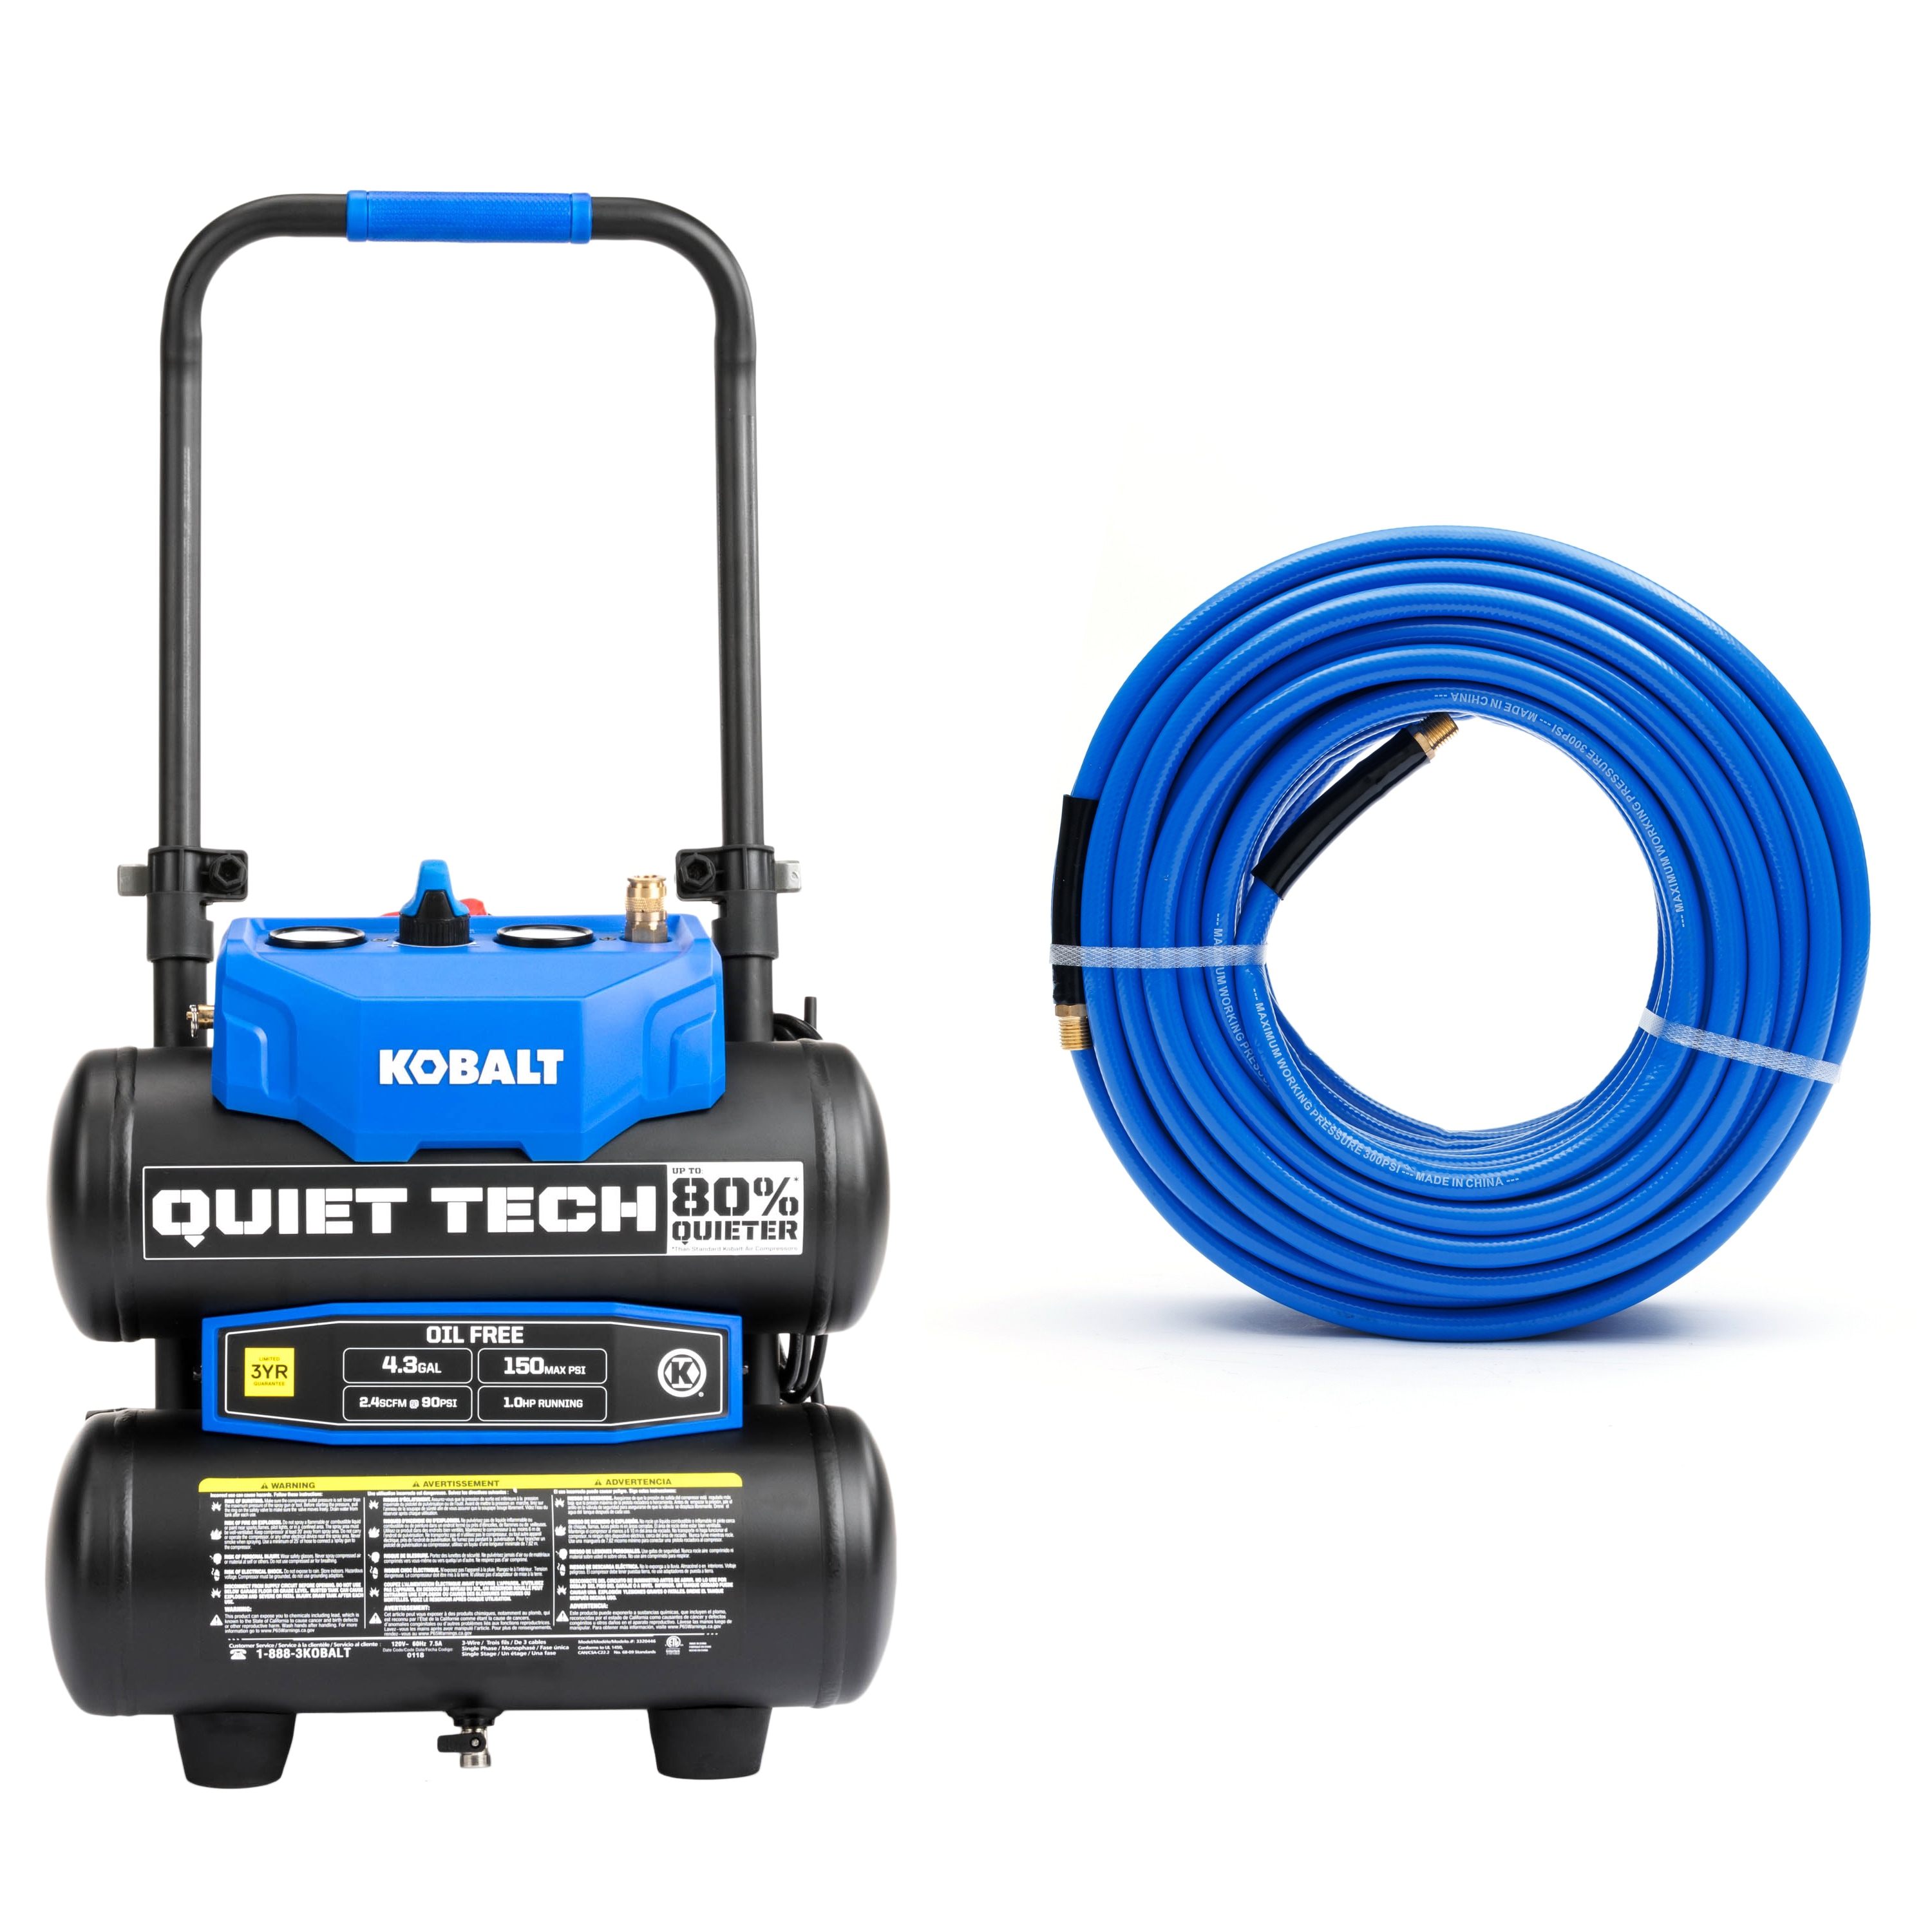 Kobalt 4.3-Gal Quiet Compressor and 3/8-IN x 50-FT PVC Air Hose